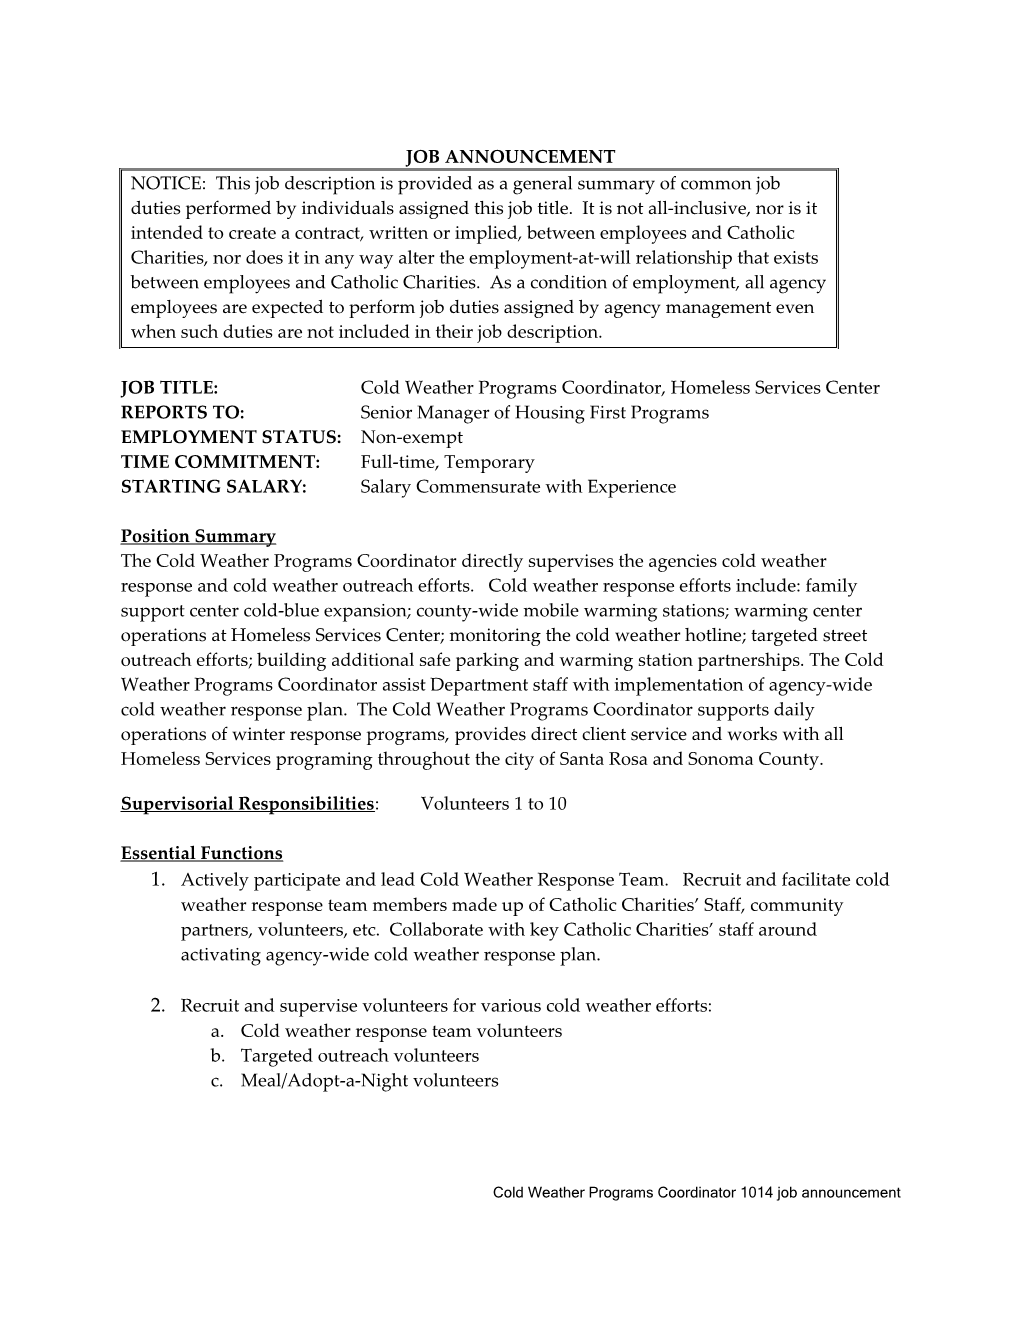 JOB TITLE:Cold Weather Programs Coordinator, Homeless Services Center